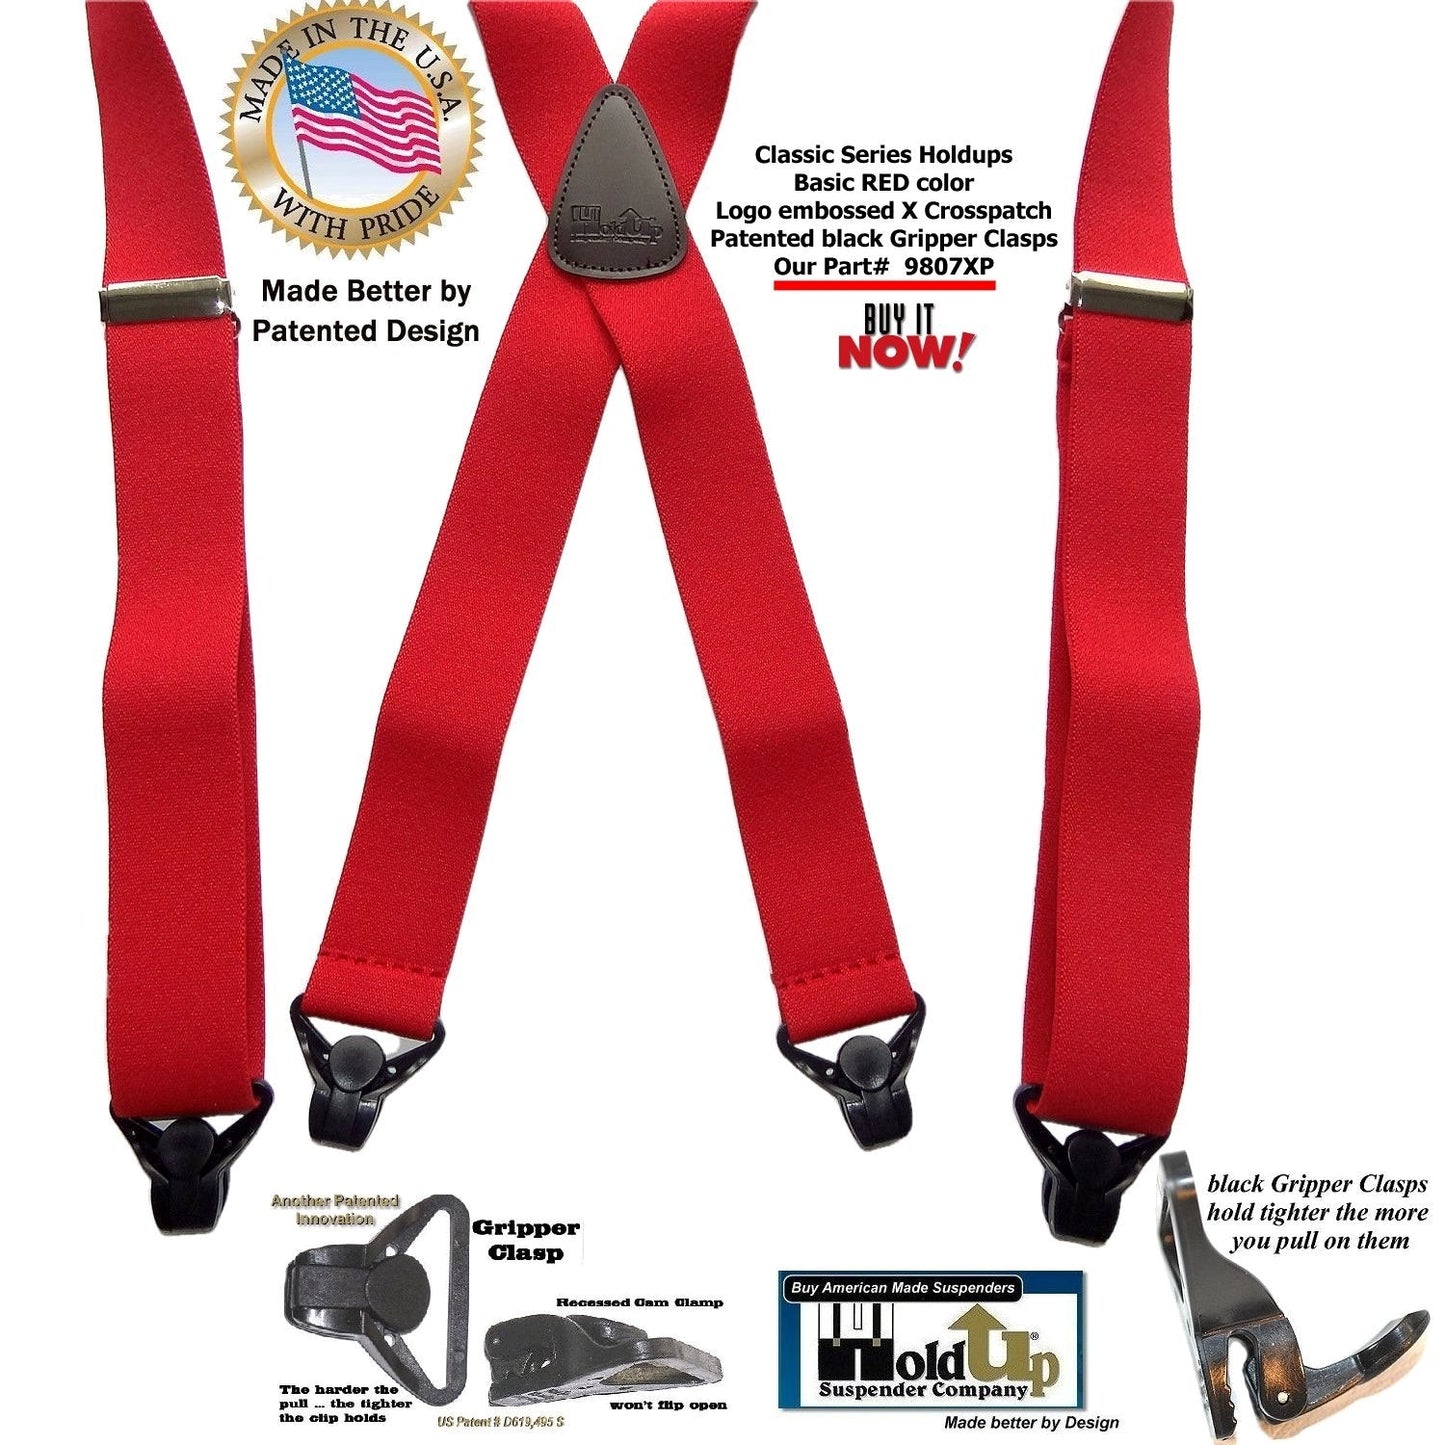 Classic RED Holdup X-back Suspenders with Patented strong black Gripper Clasps